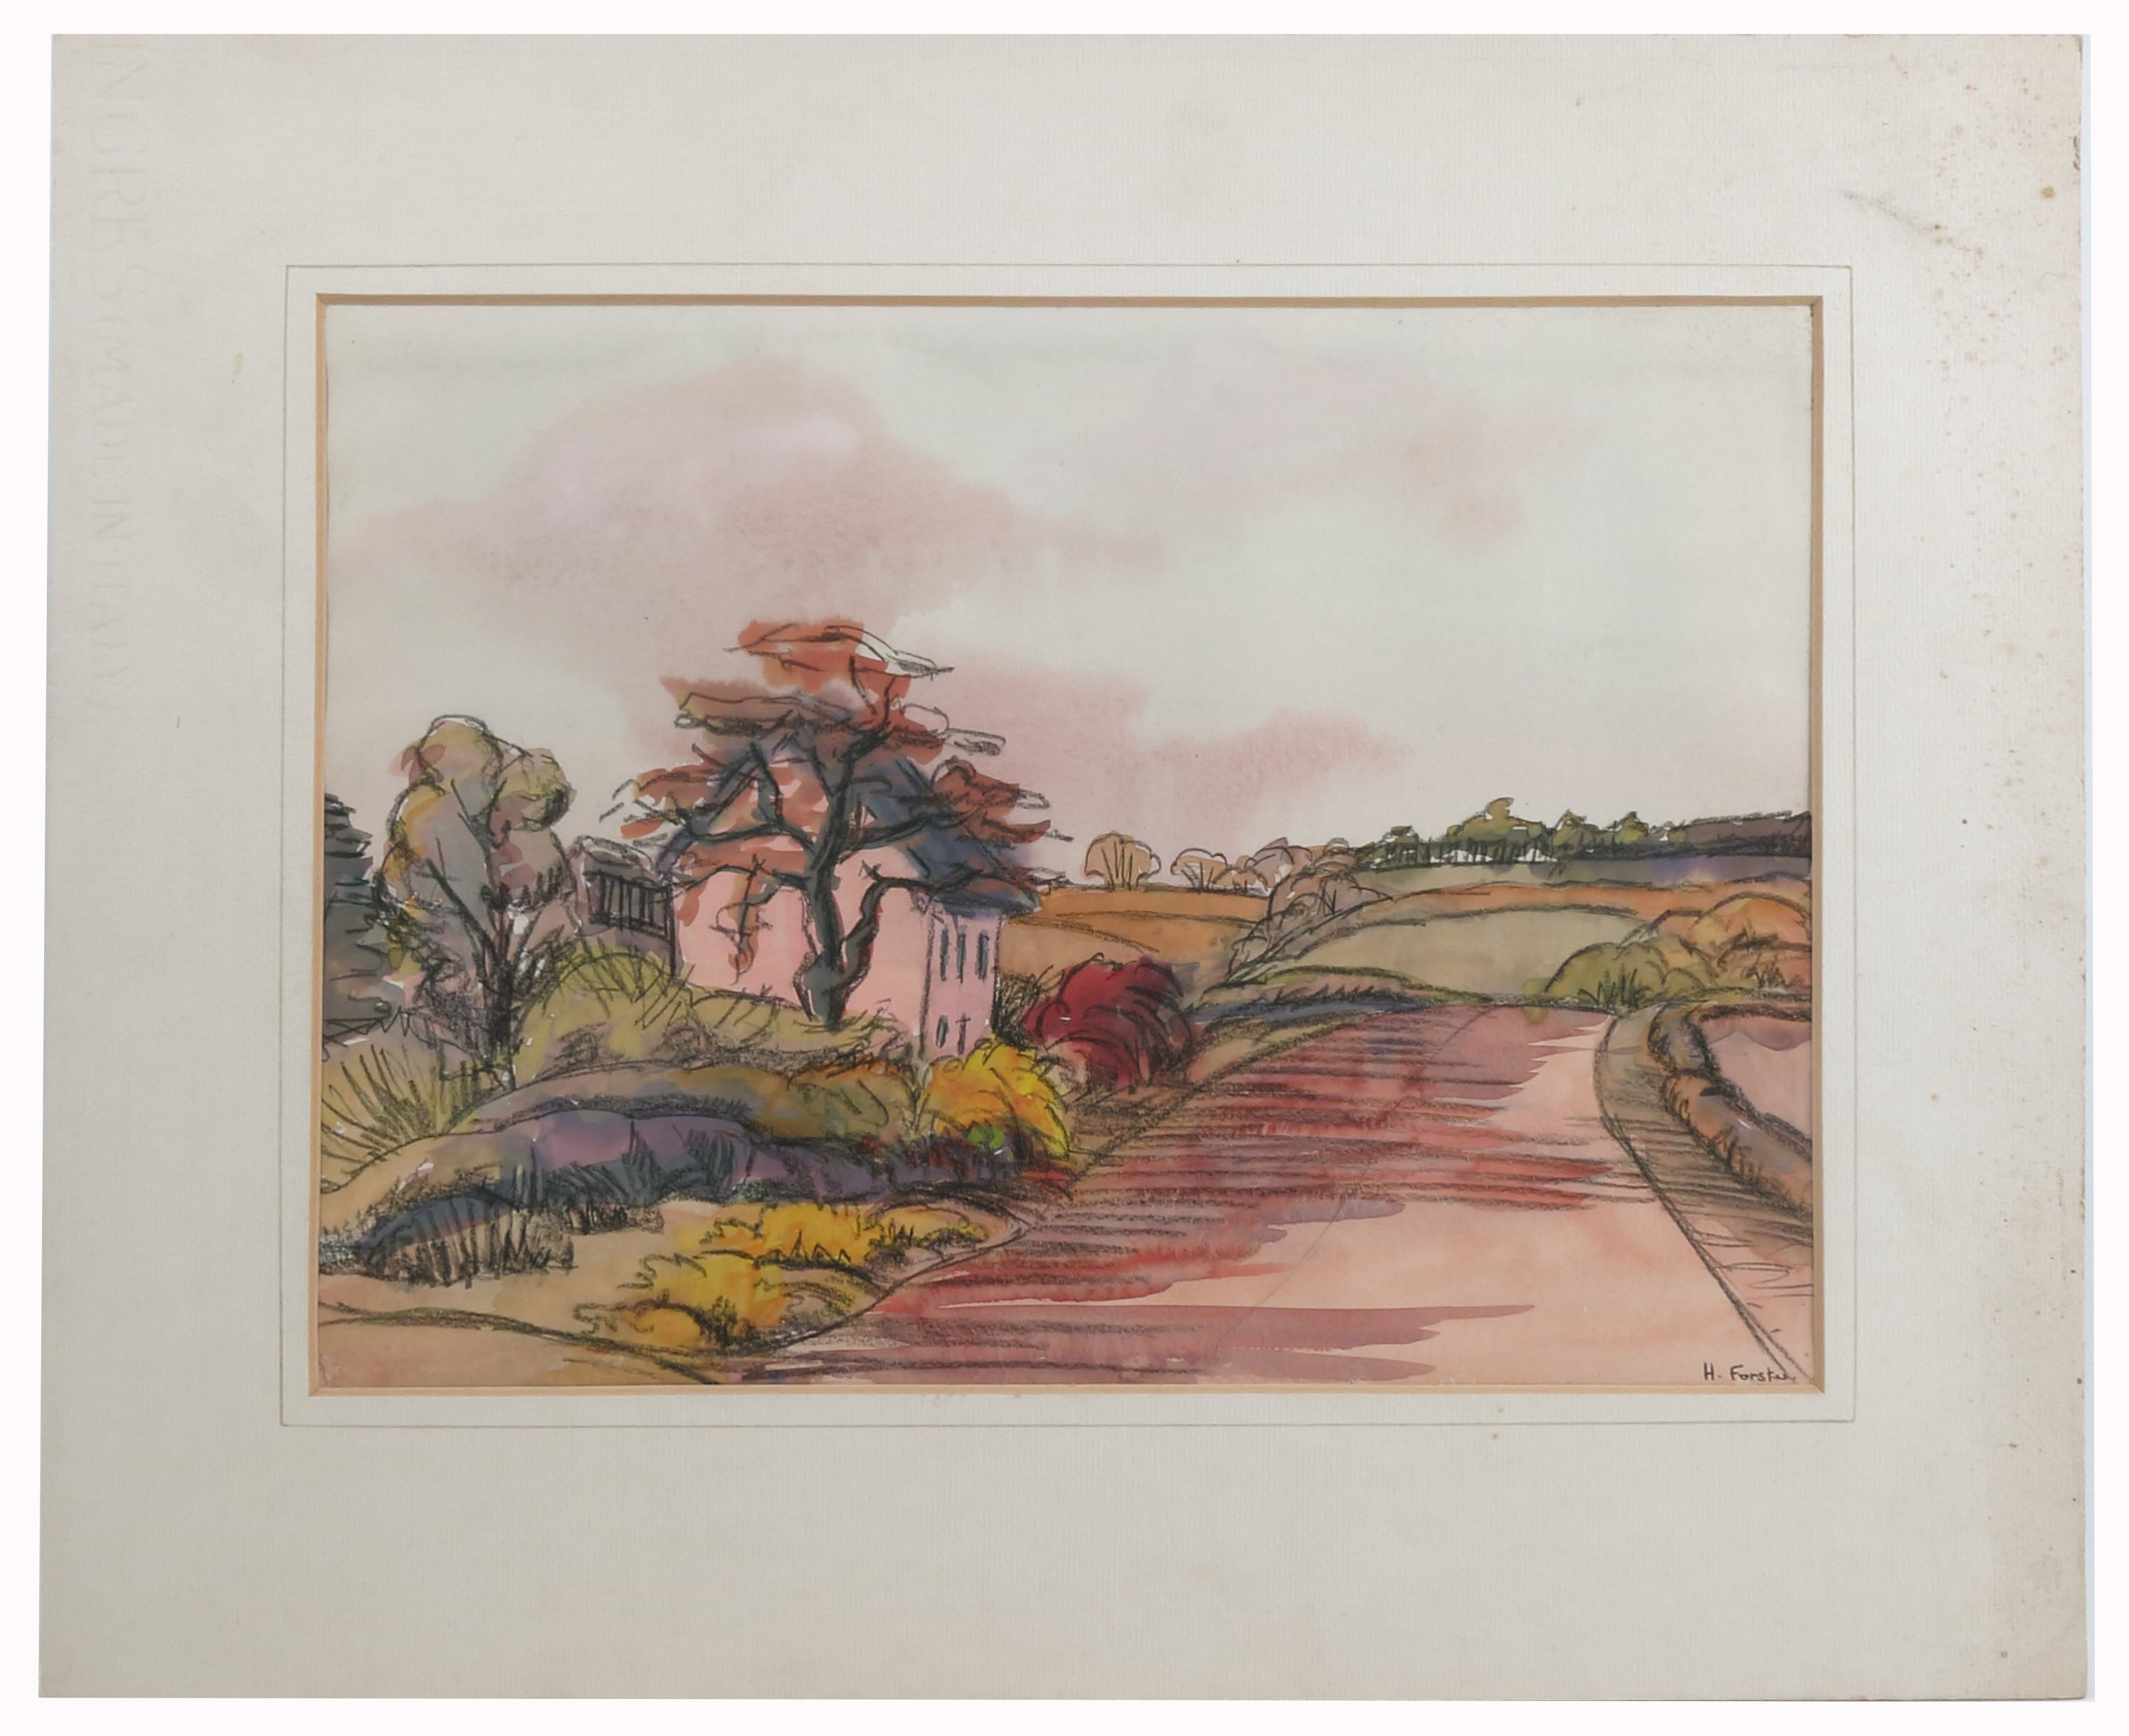 H Foster, watercolour, view along a road with pink cottage and trees, inscribed Meynell to the